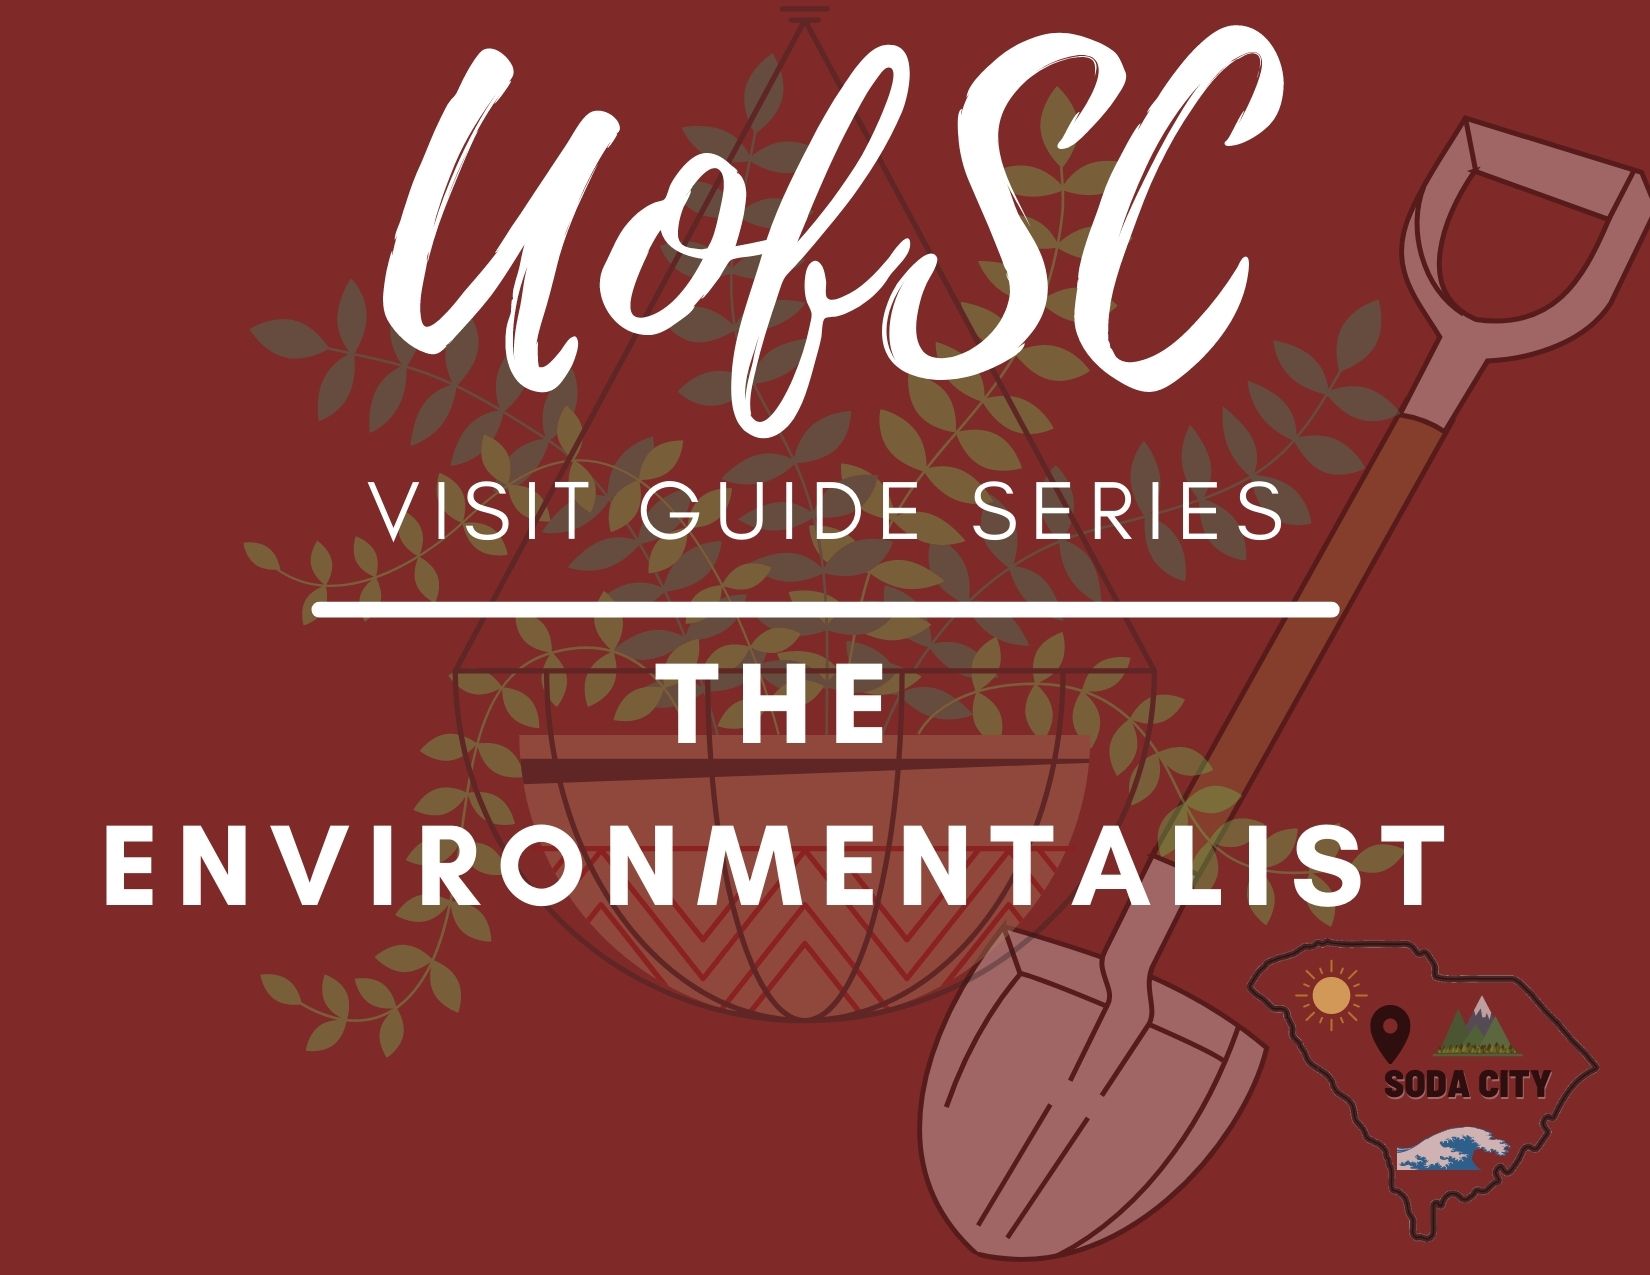 UofSC Visit Guide Series The Environmentalist